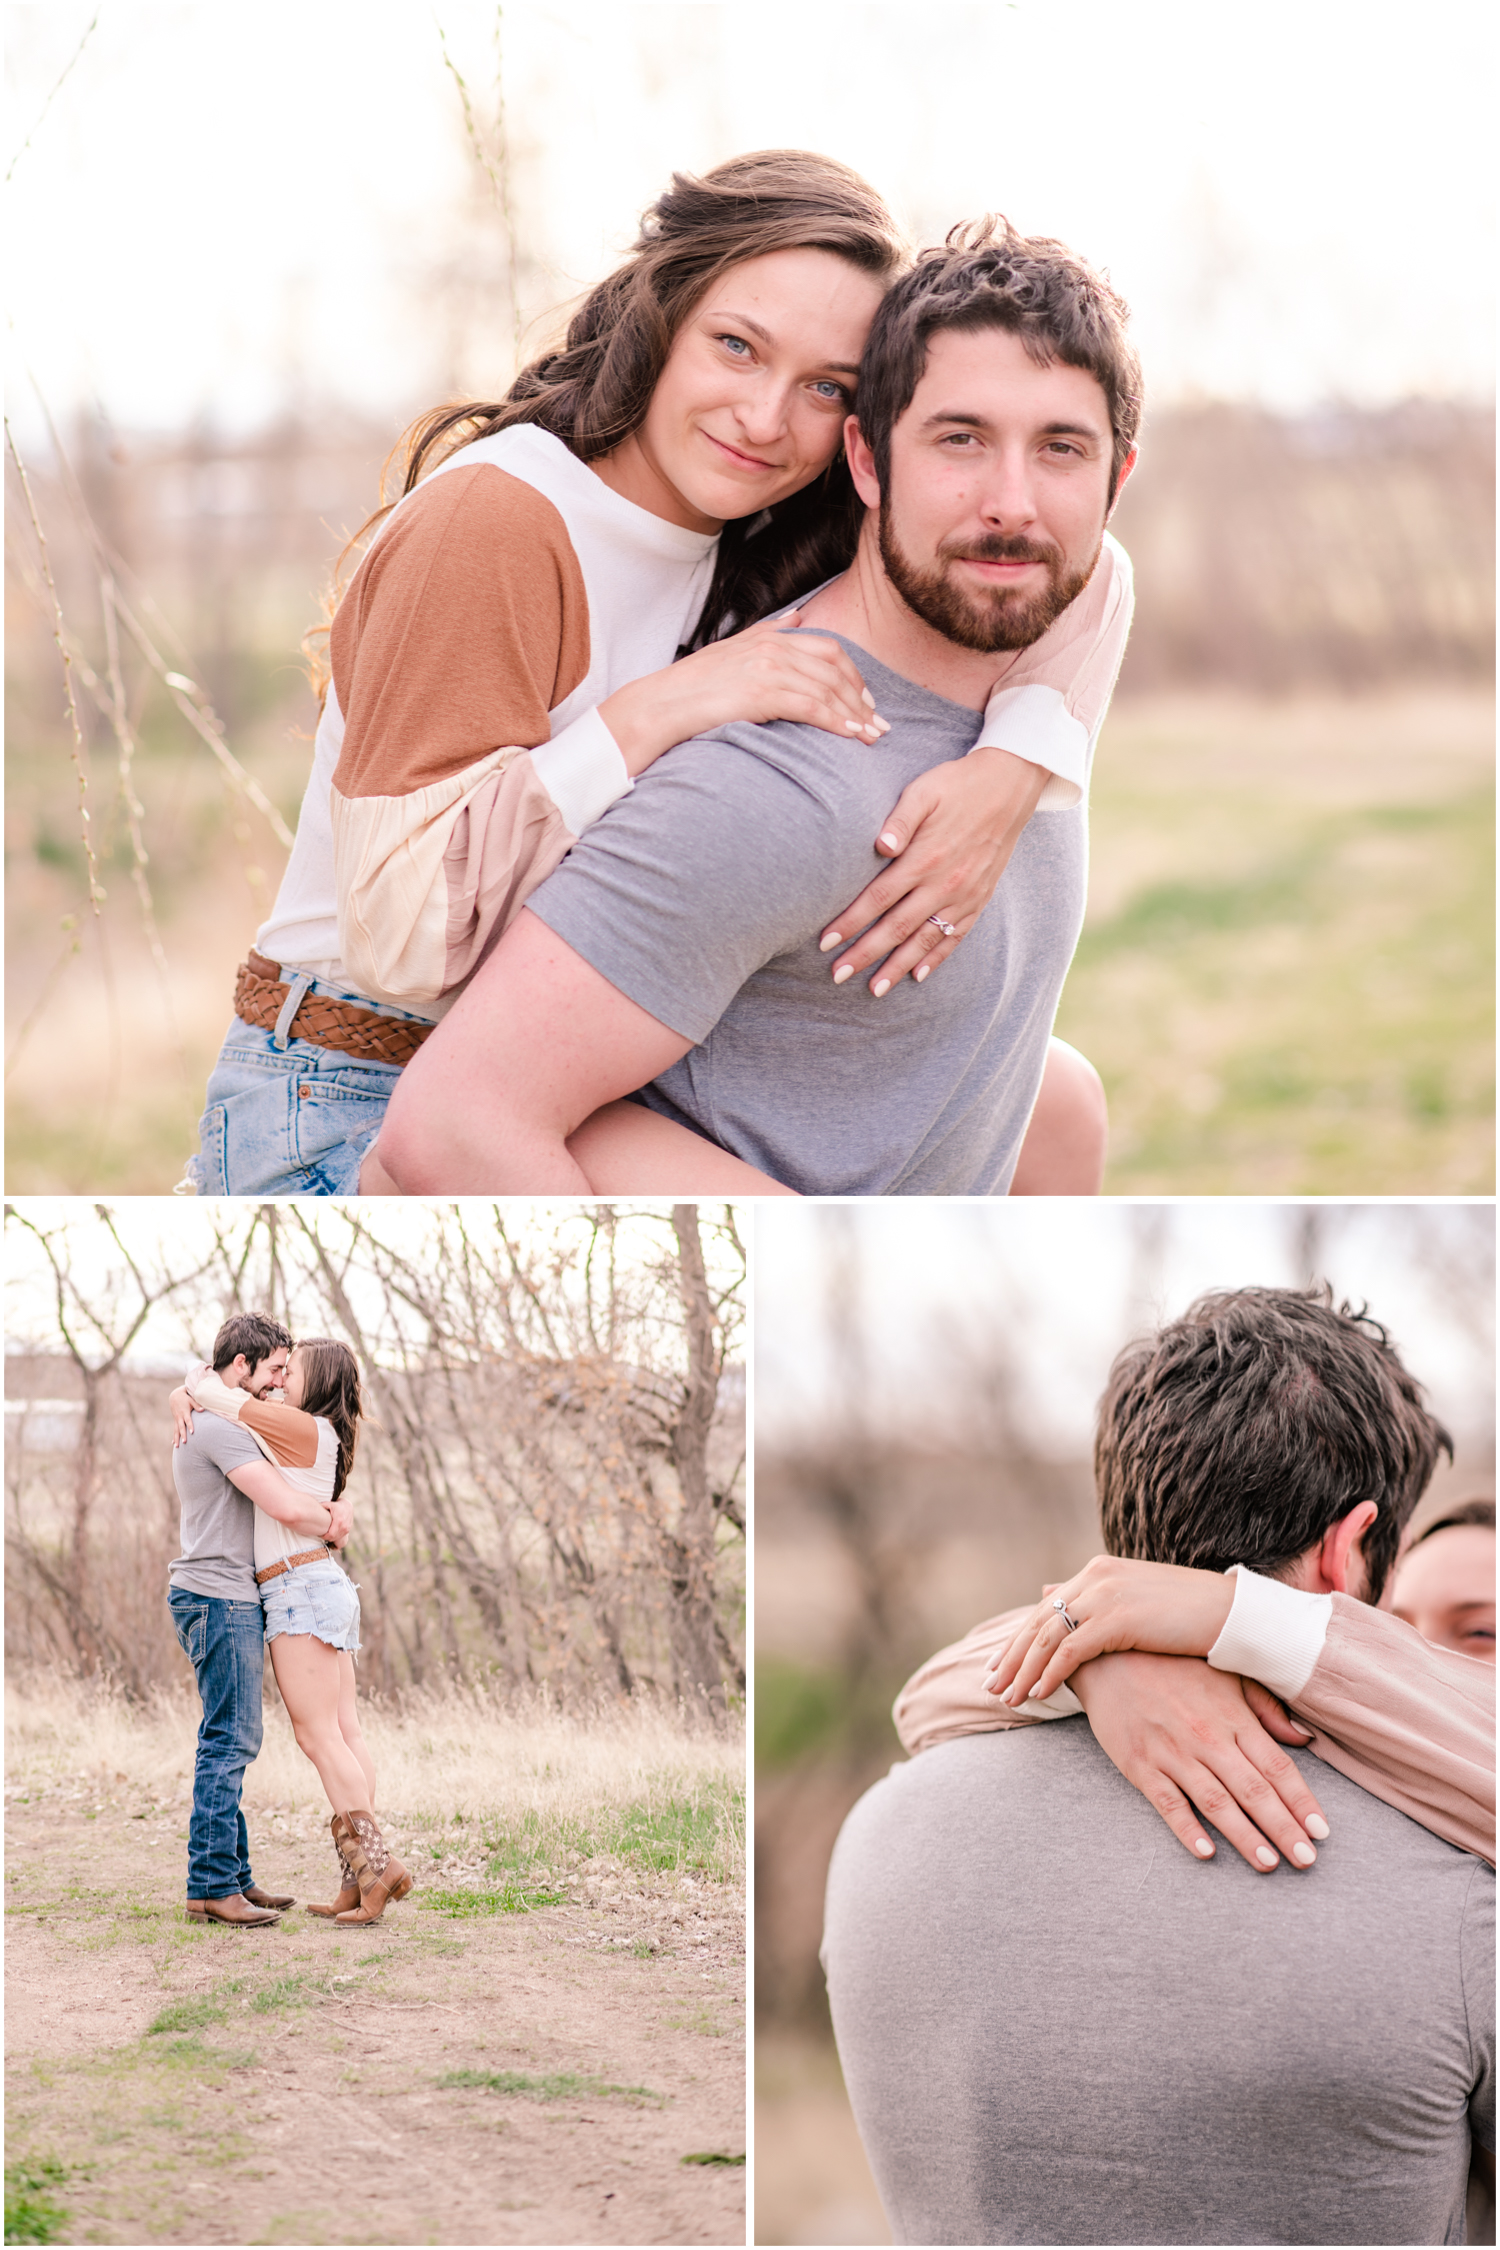 Country Themed Engagement Photos | By Wedding Photographer Britni Girard Photography in Denver Colorado